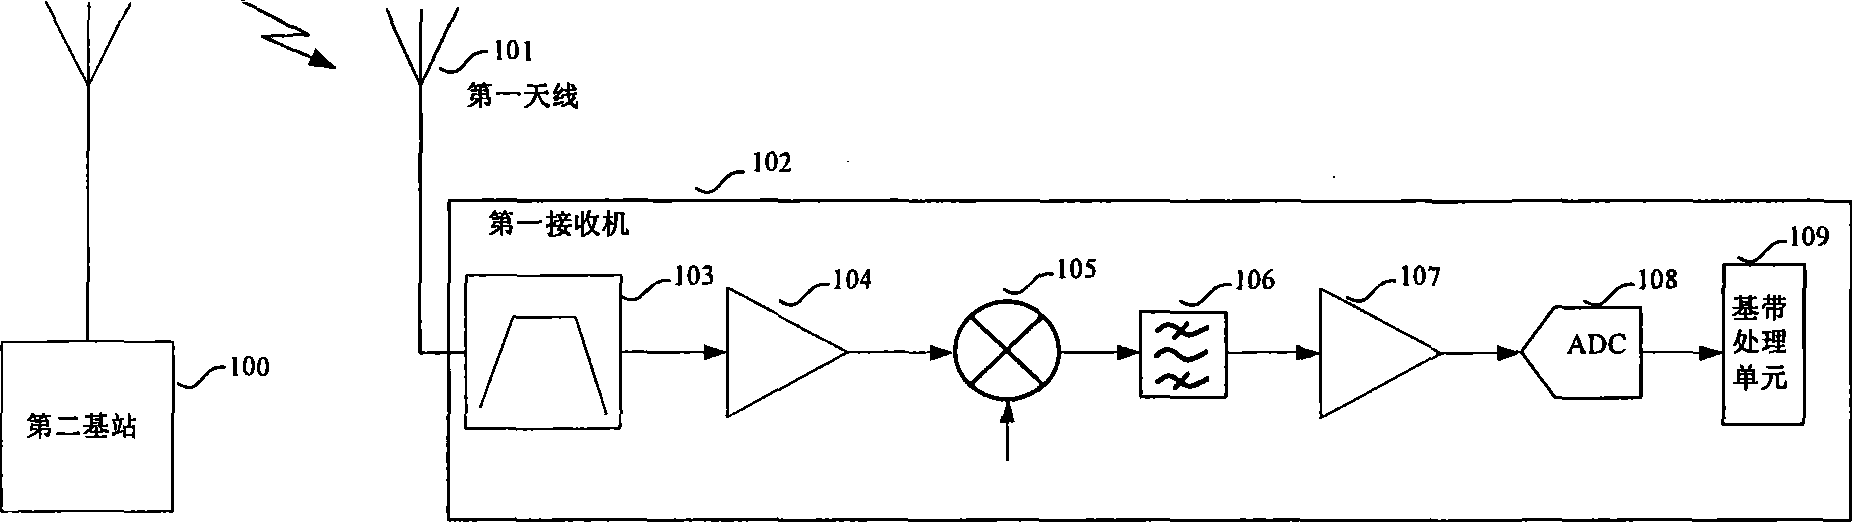 Common station address interference elimination system and method